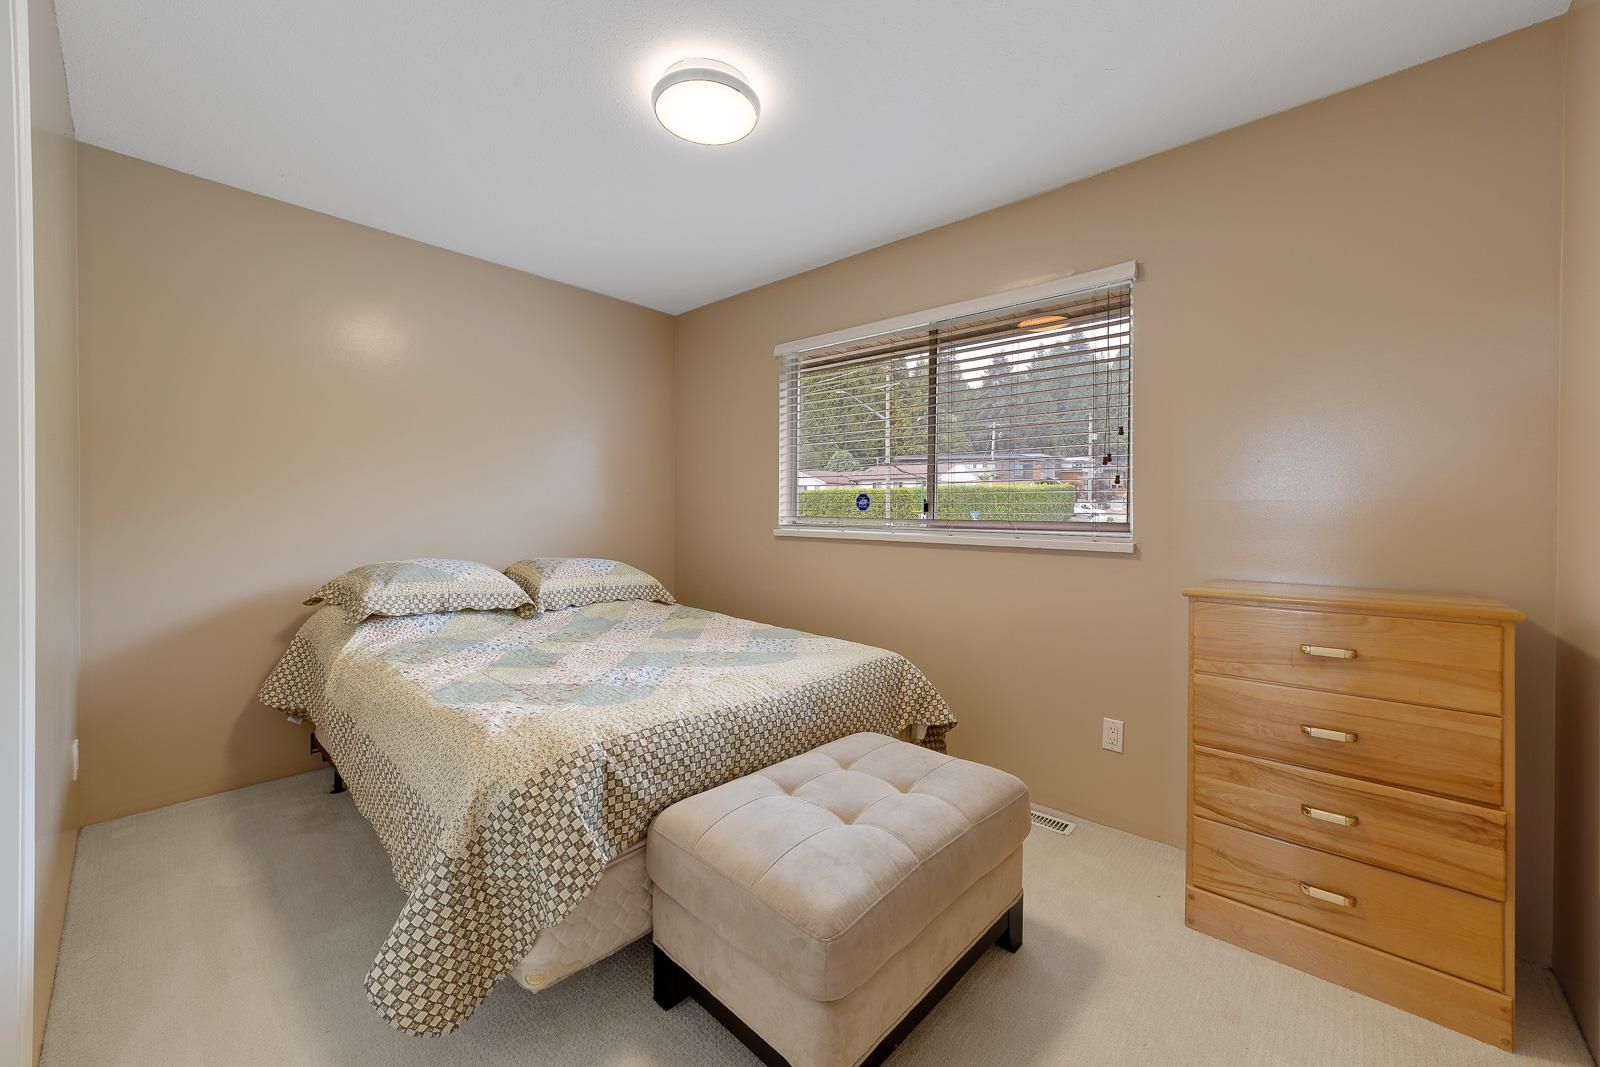 Photo 17: Photos: 757 E 29TH STREET in North Vancouver: Tempe House for sale : MLS®# R2617557